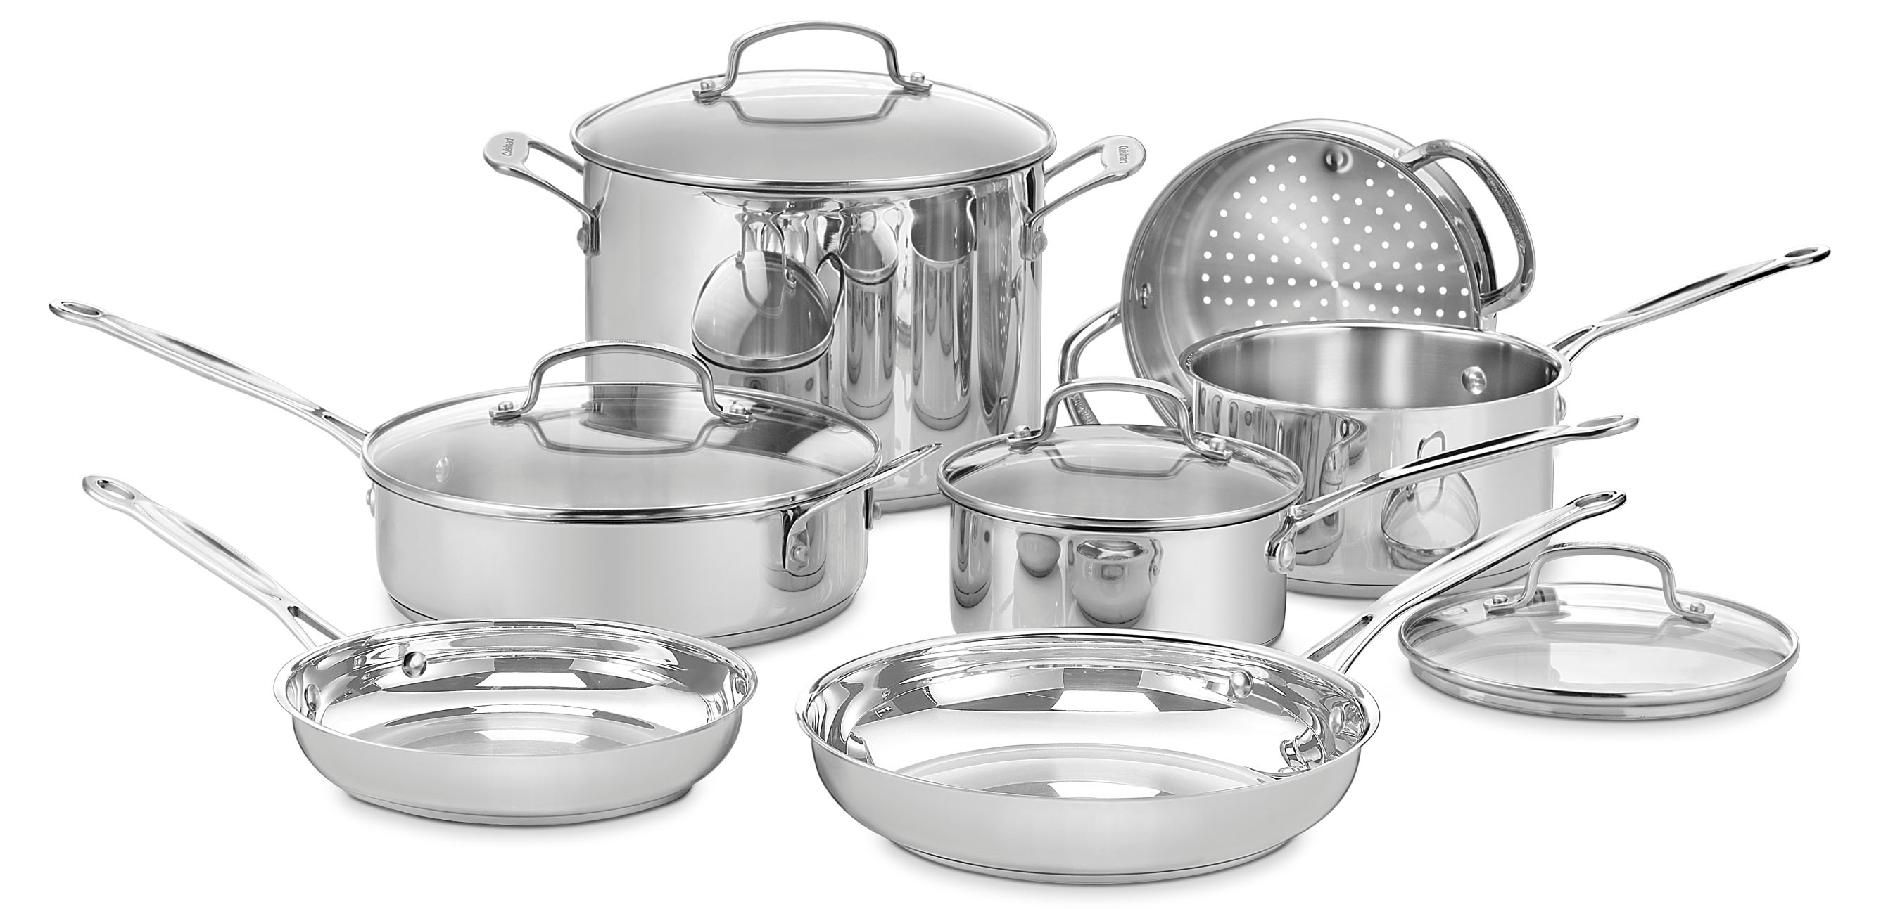 Cuisinart Stainless Steel Pots And Pans Set